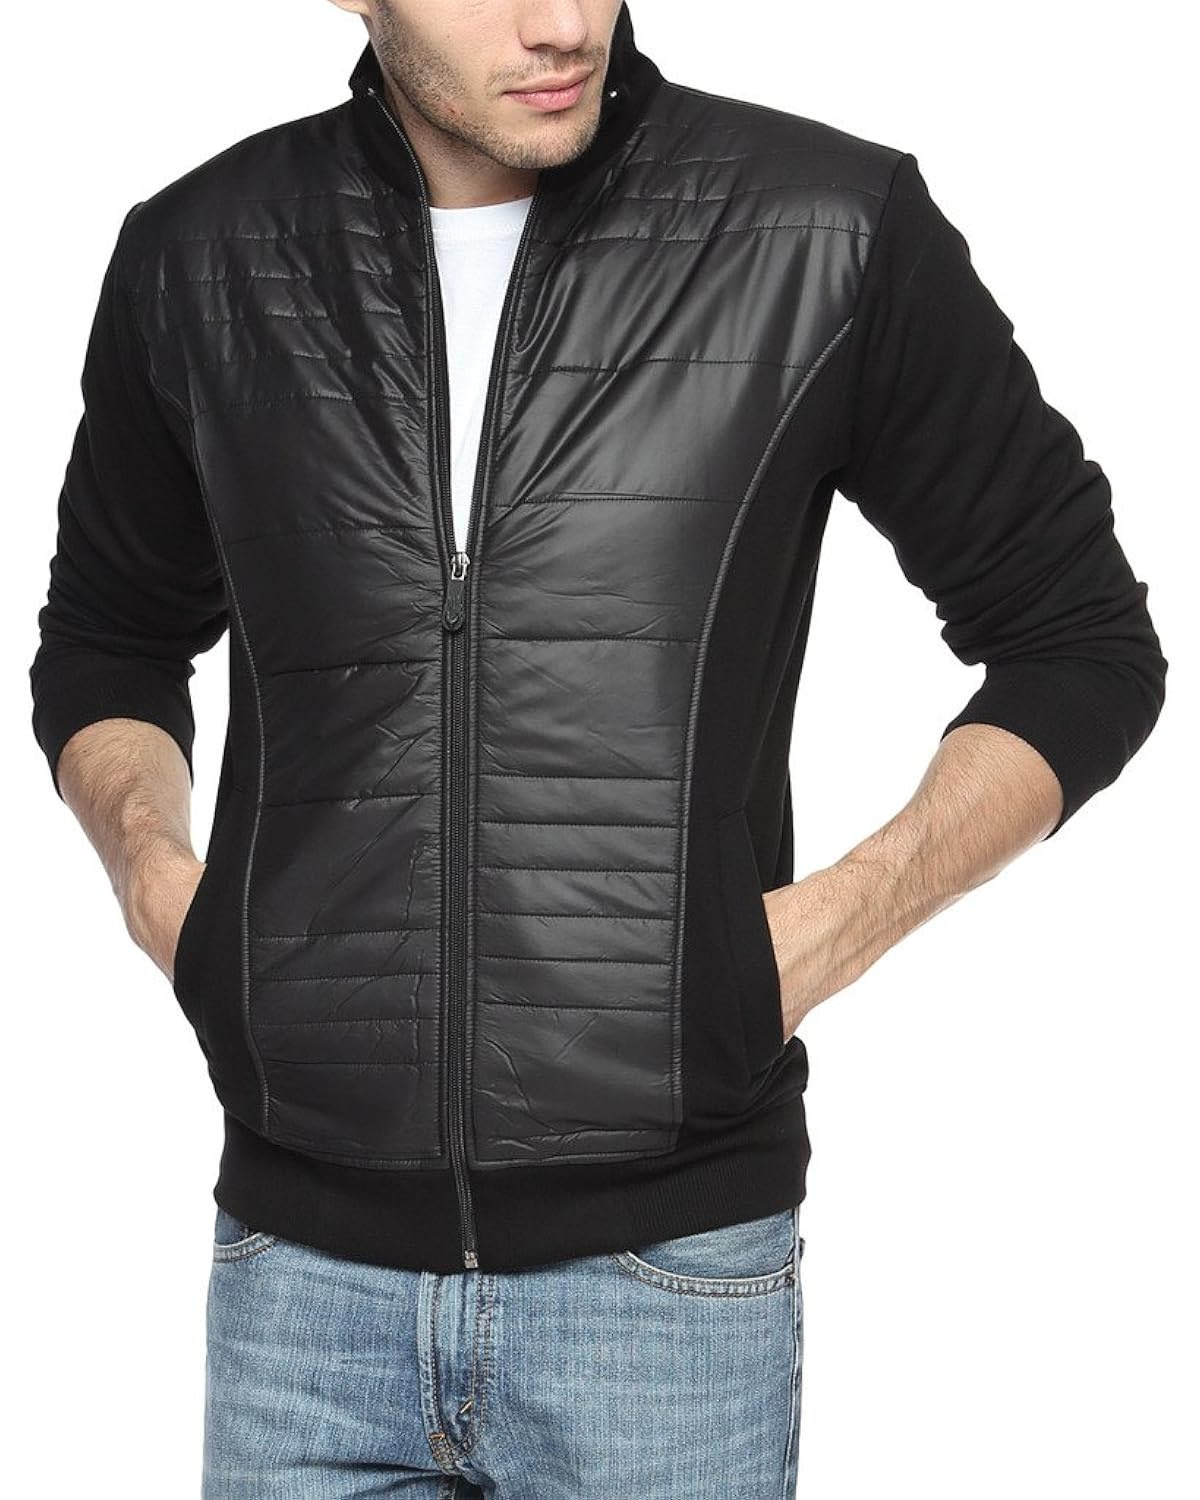 Amazon Quality Drop Shipping 2016 New Brand Leather Jacket